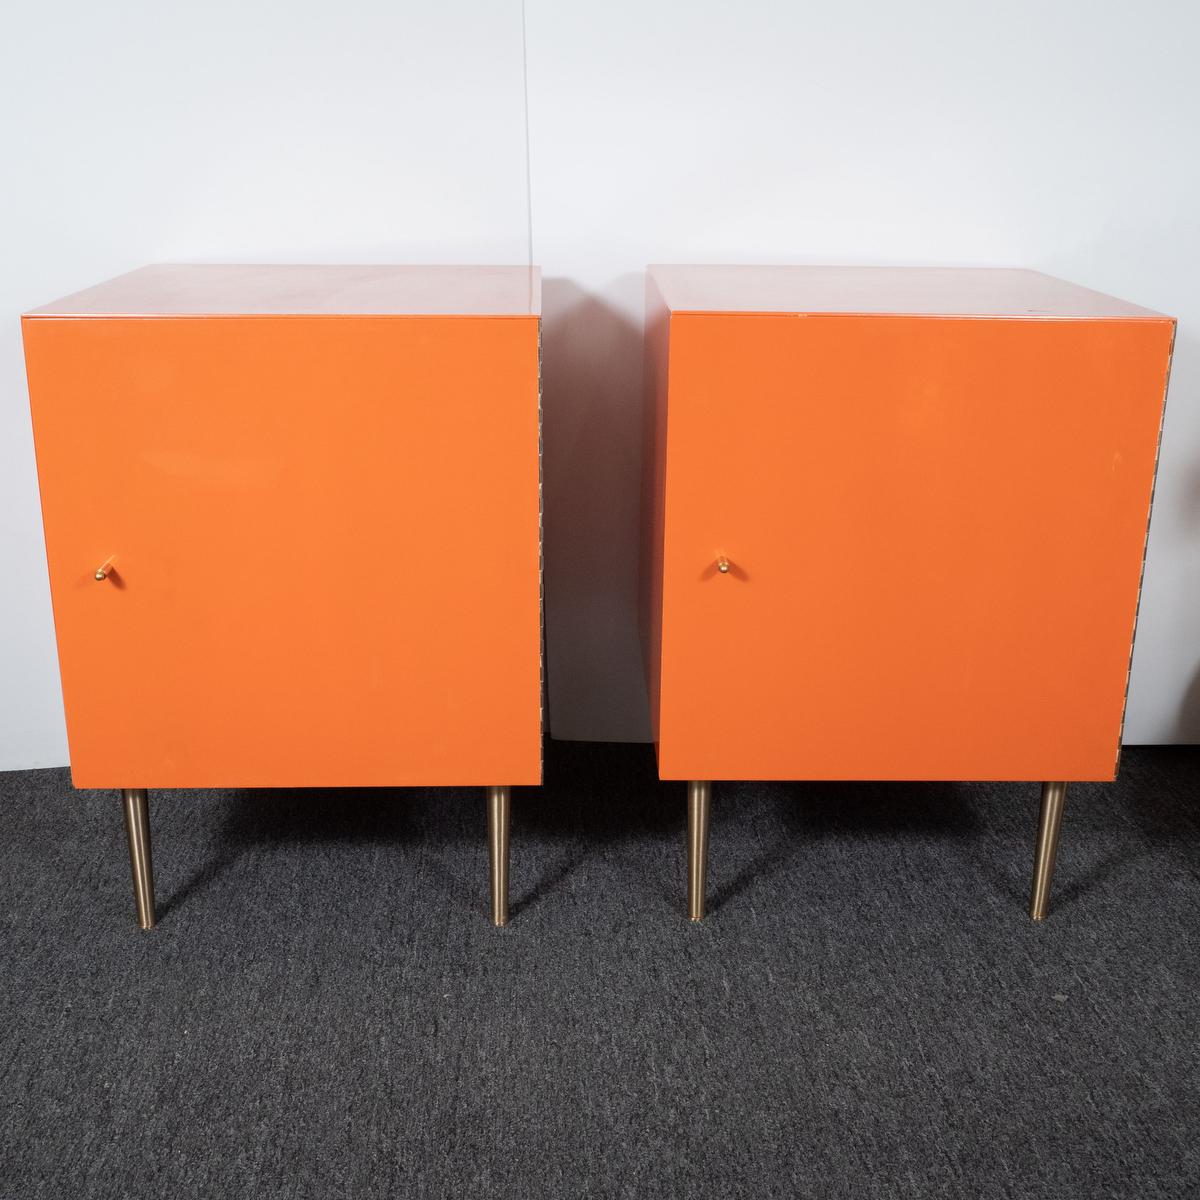 Pair of Mid-Century Modern Cubic Orange Cabinets In Good Condition For Sale In Tarrytown, NY